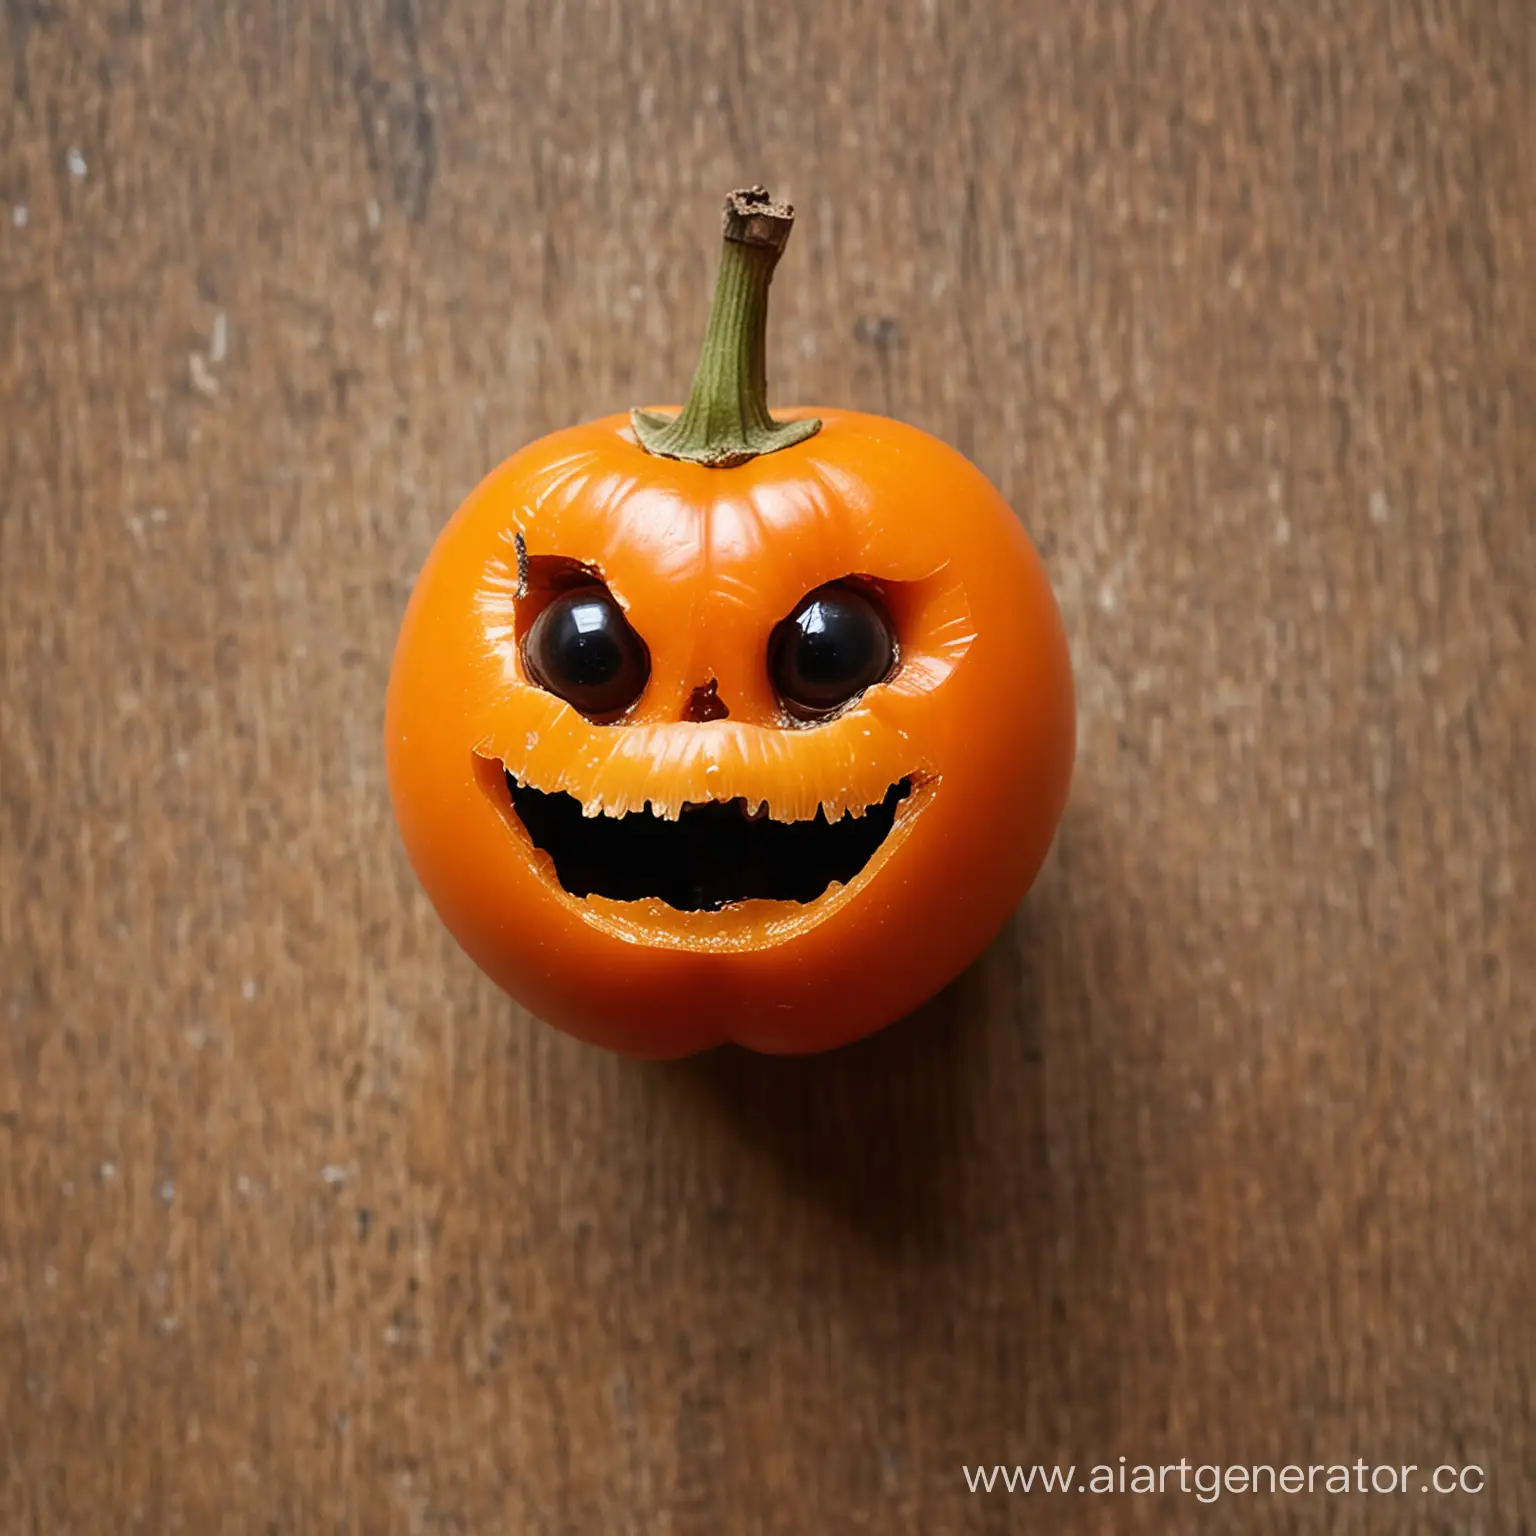 Cheerful-Drunken-Persimmon-with-a-Playful-Expression